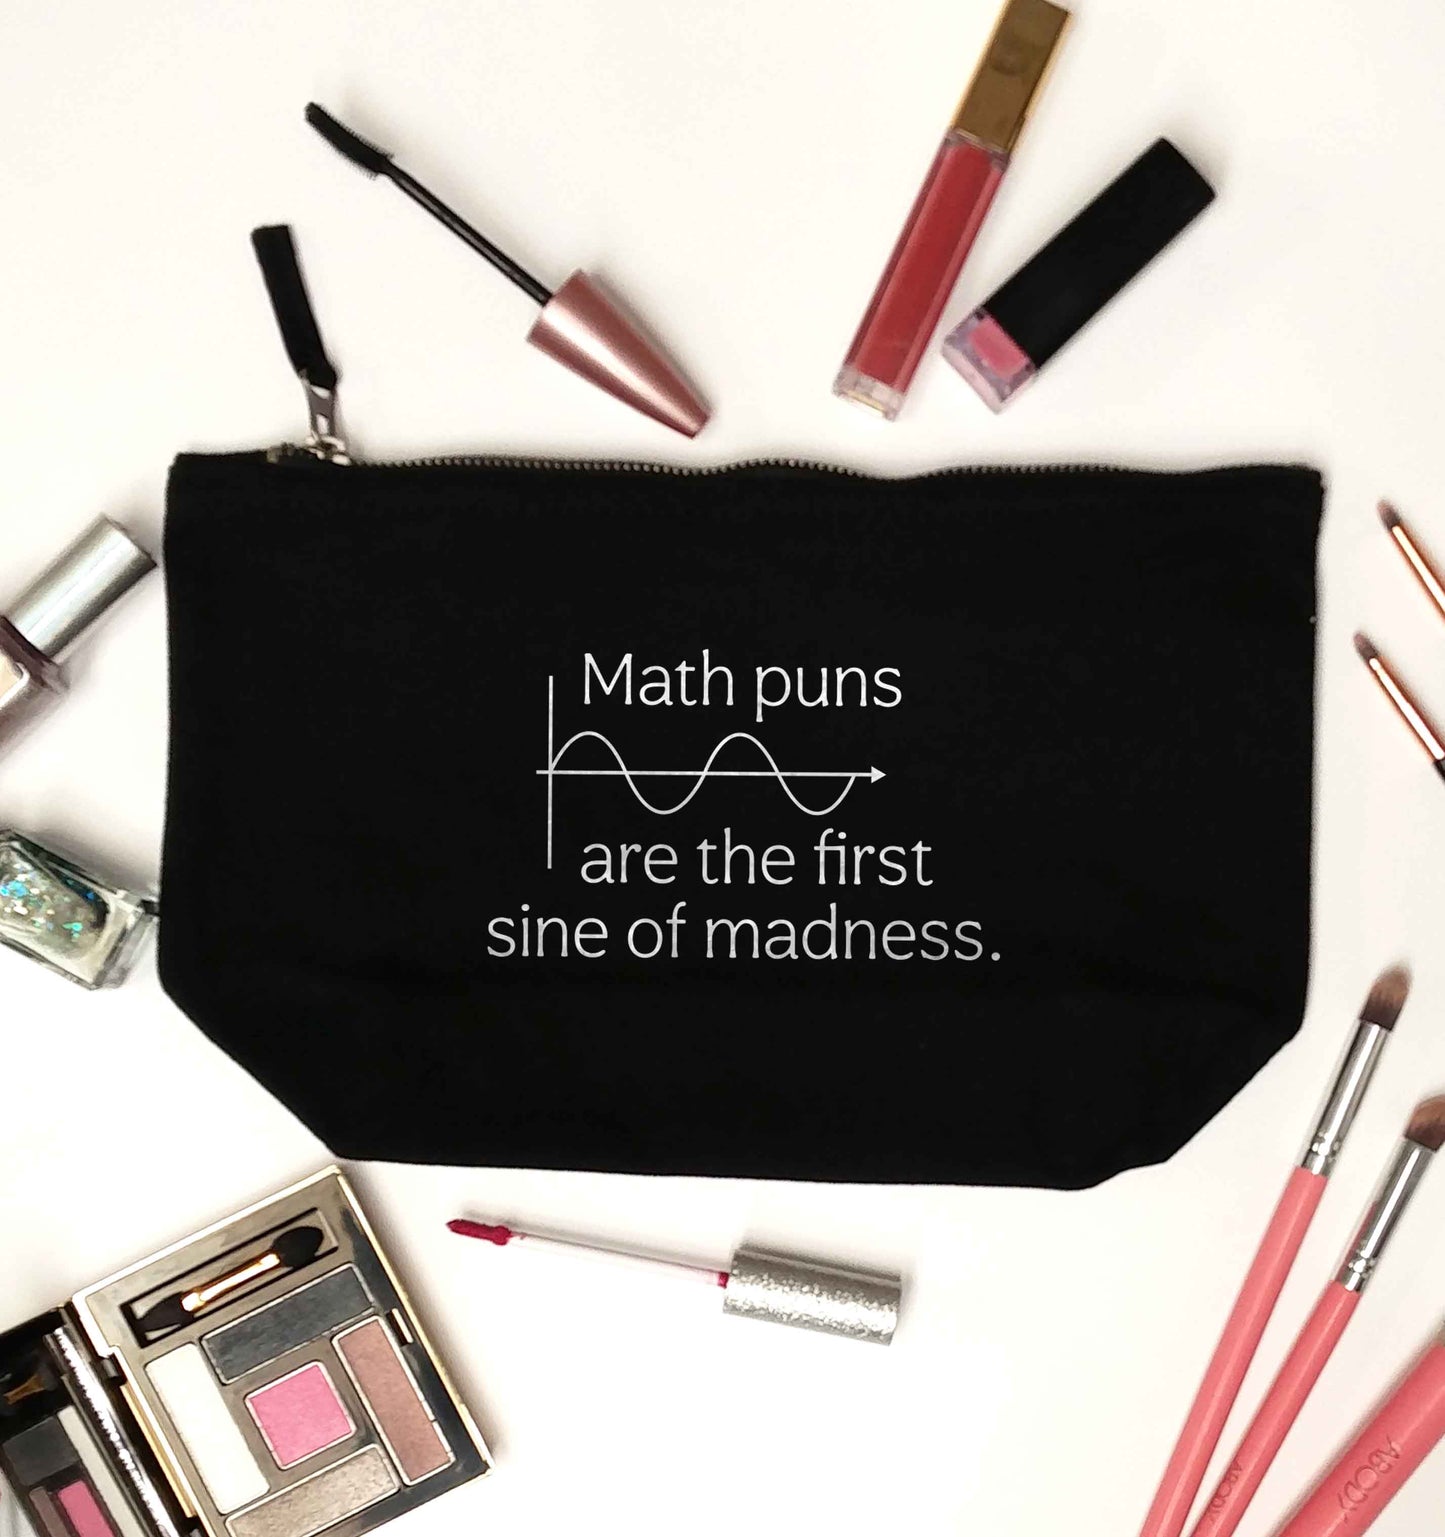 Math puns are the first sine of madness black makeup bag